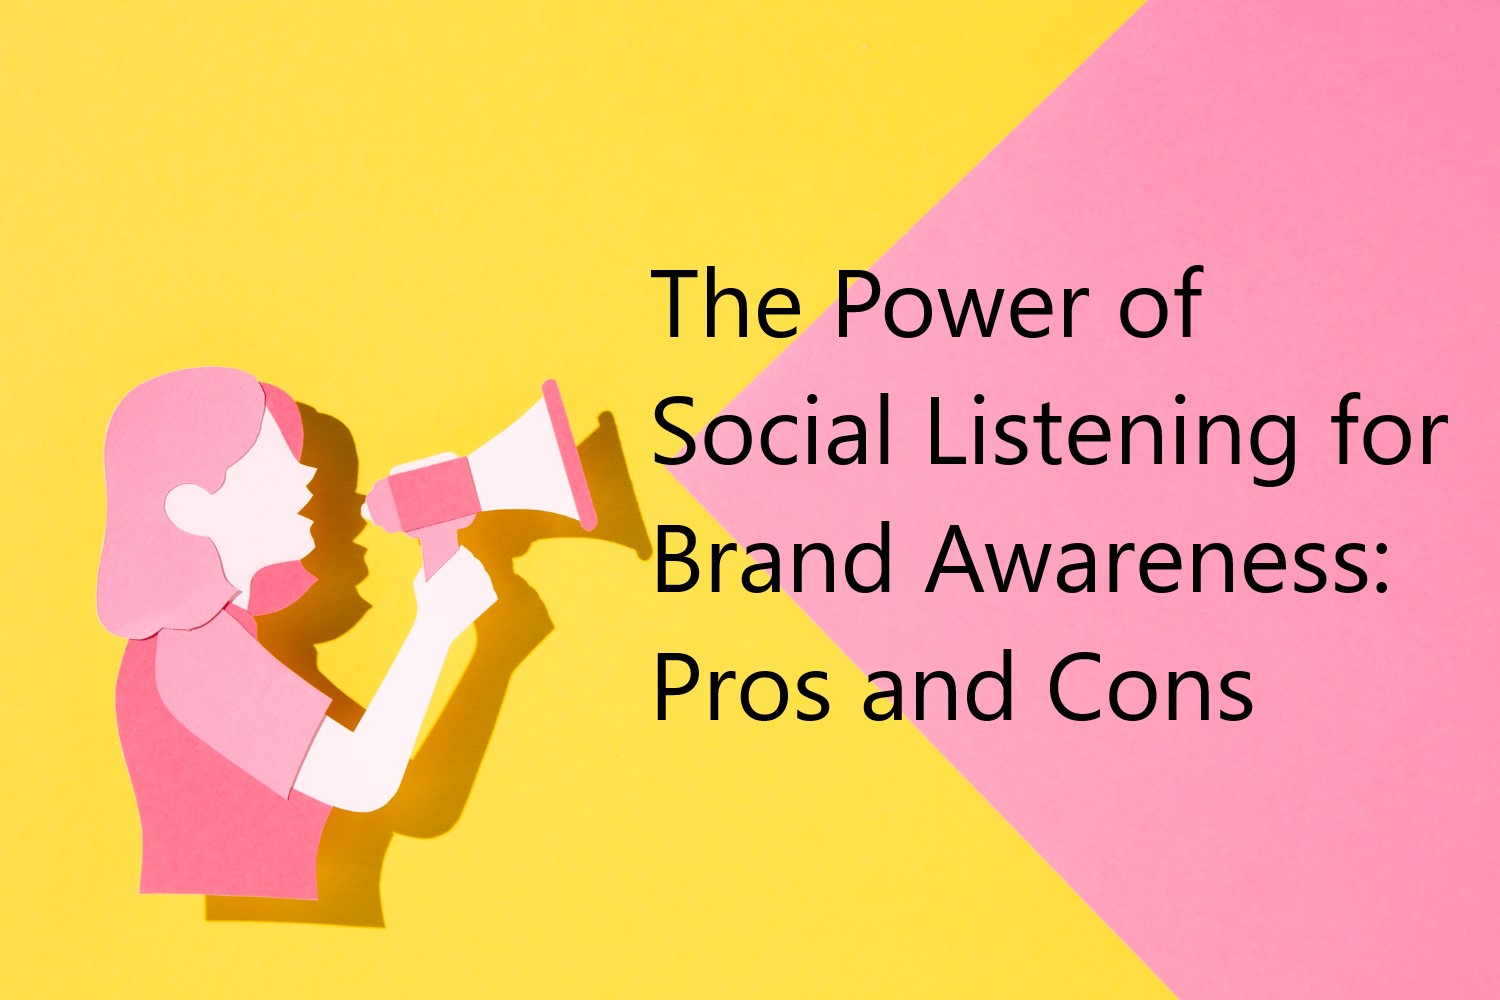 The Power of Social Listening for Brand Awareness Pros and Cons